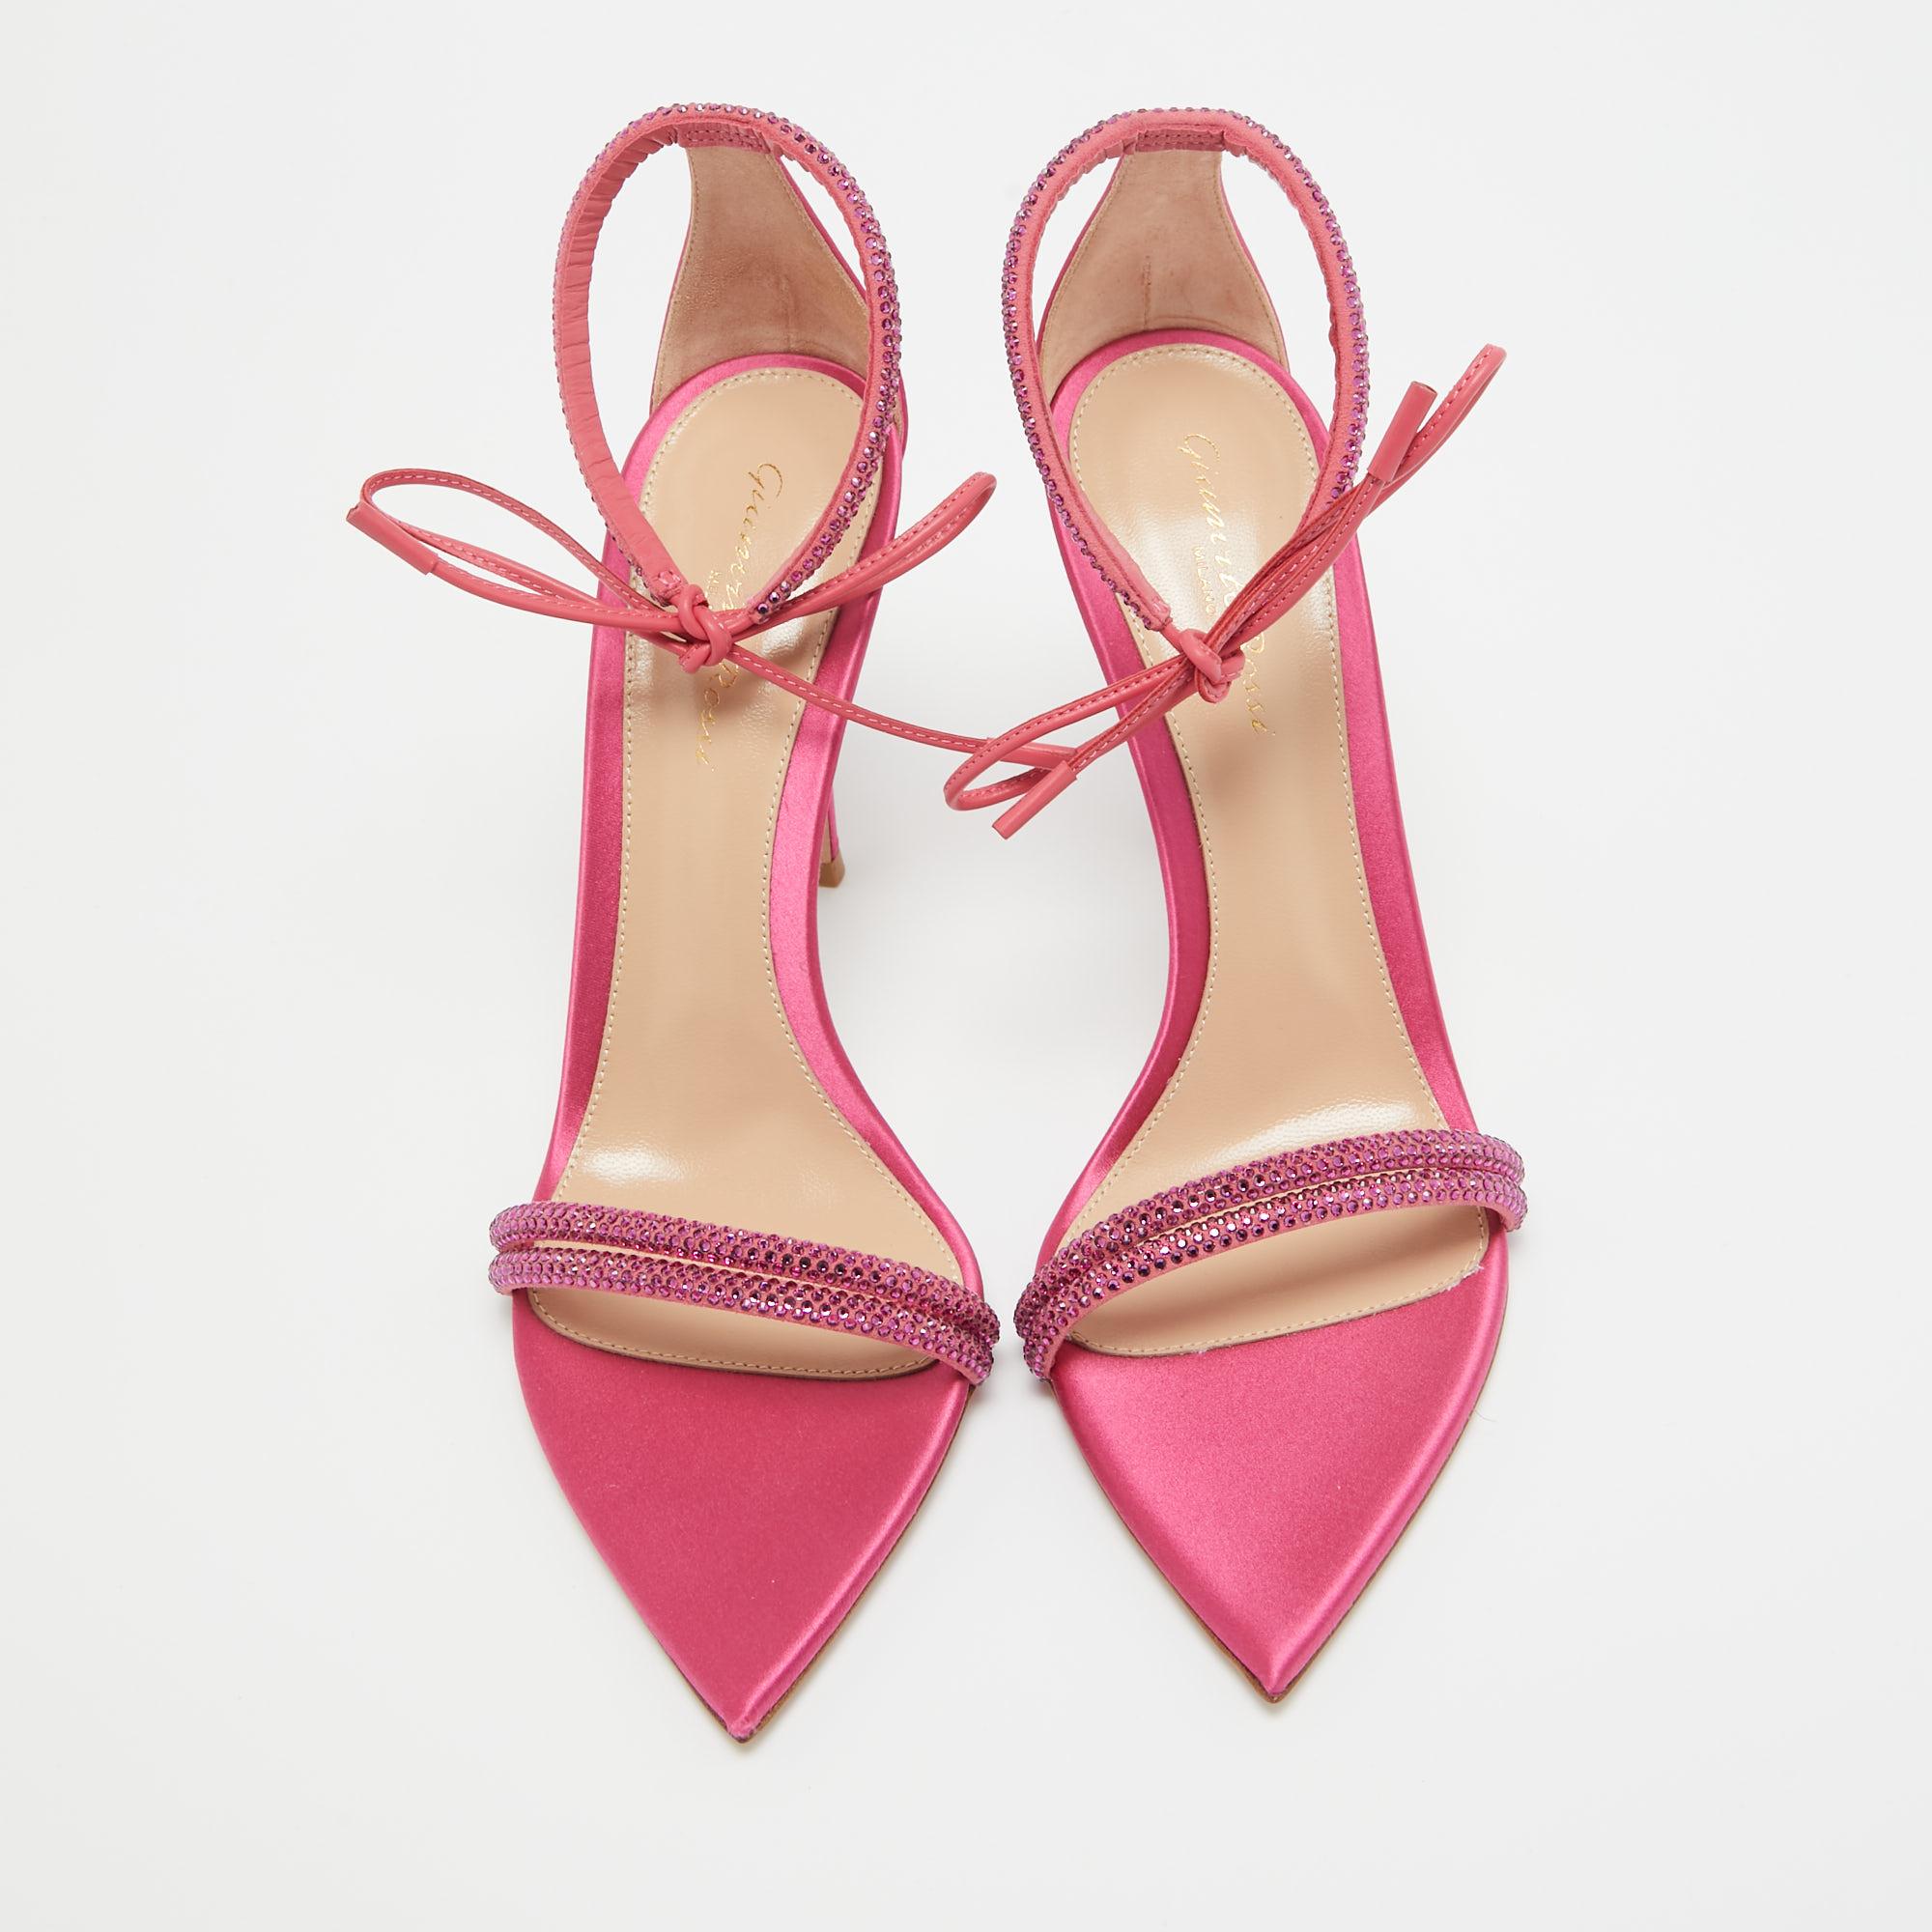 Gianvito Rossi Pink Satin Embellished Montecarlo Sandals Size 38.5 For Sale 2